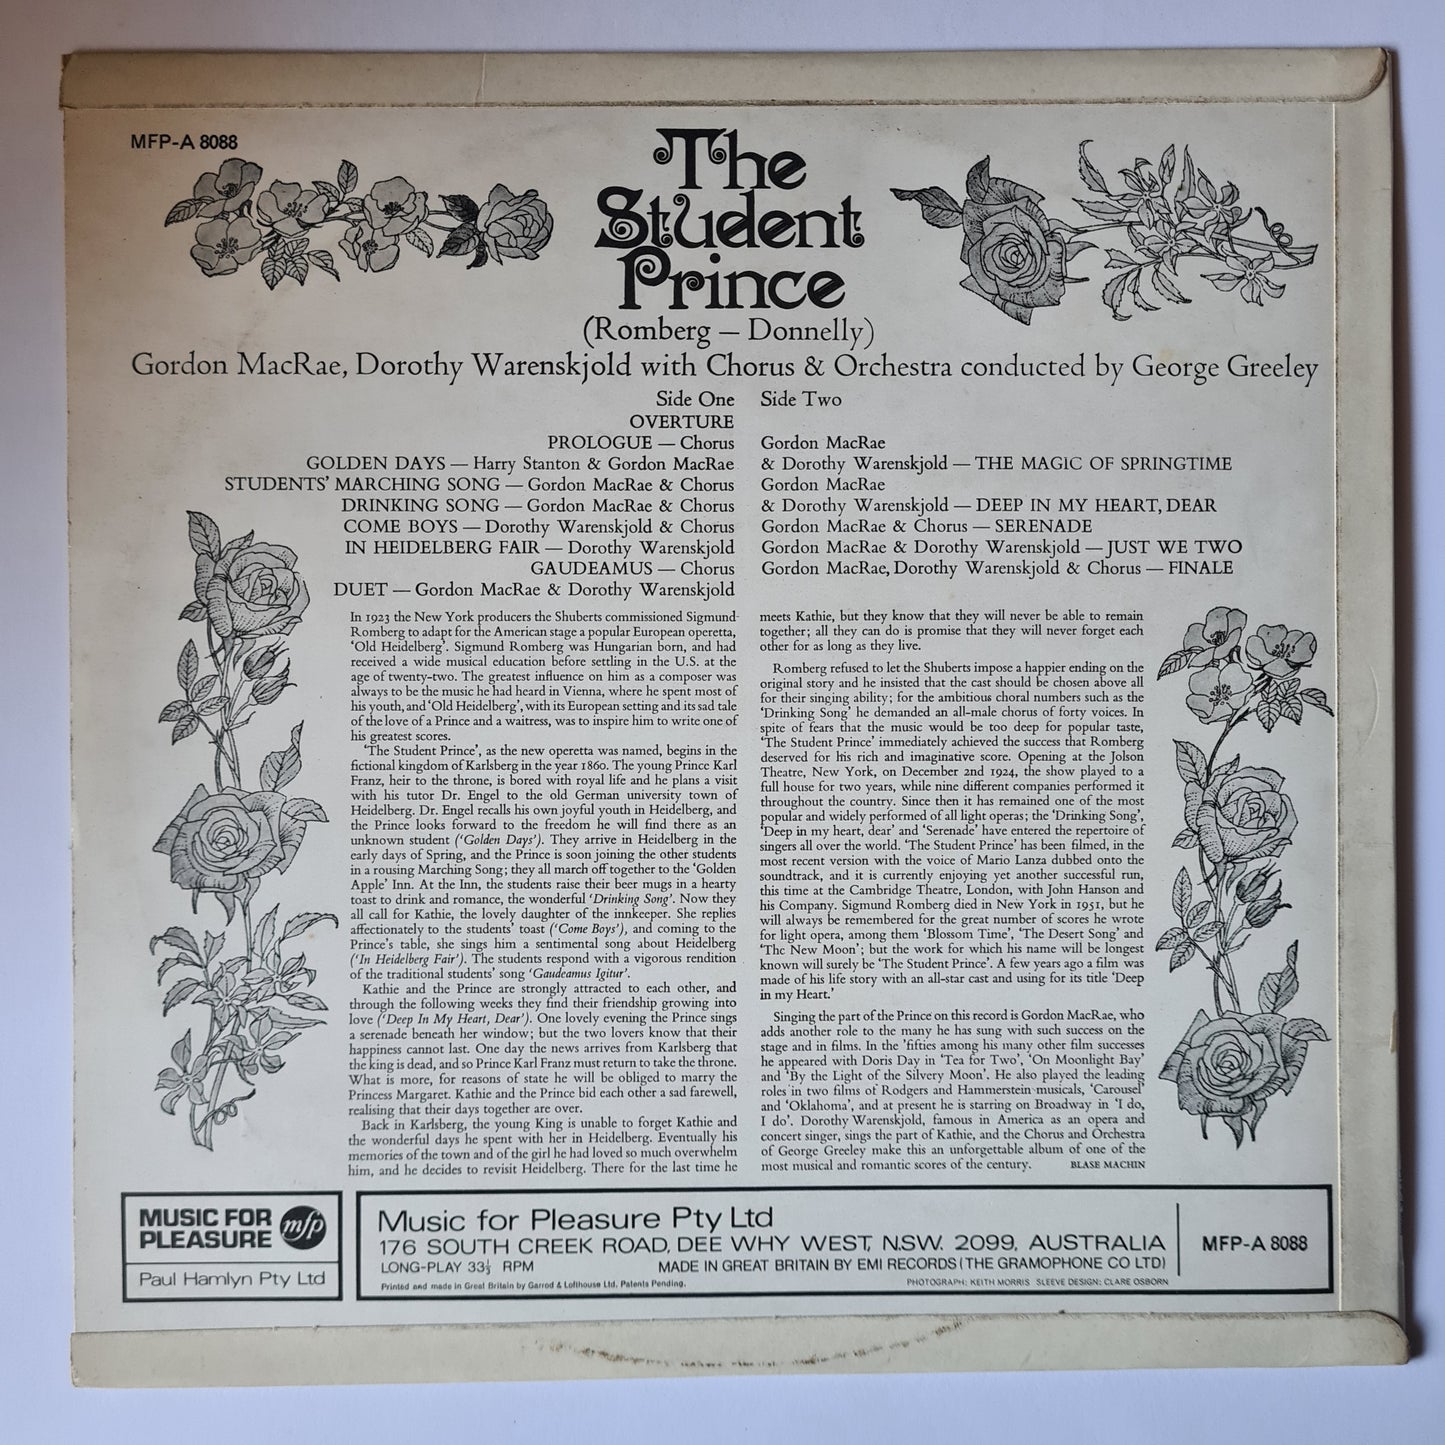 CLEARANCE STOCK! SOUNDTRACK: THE STUDENT PRINCE - VINYL RECORD